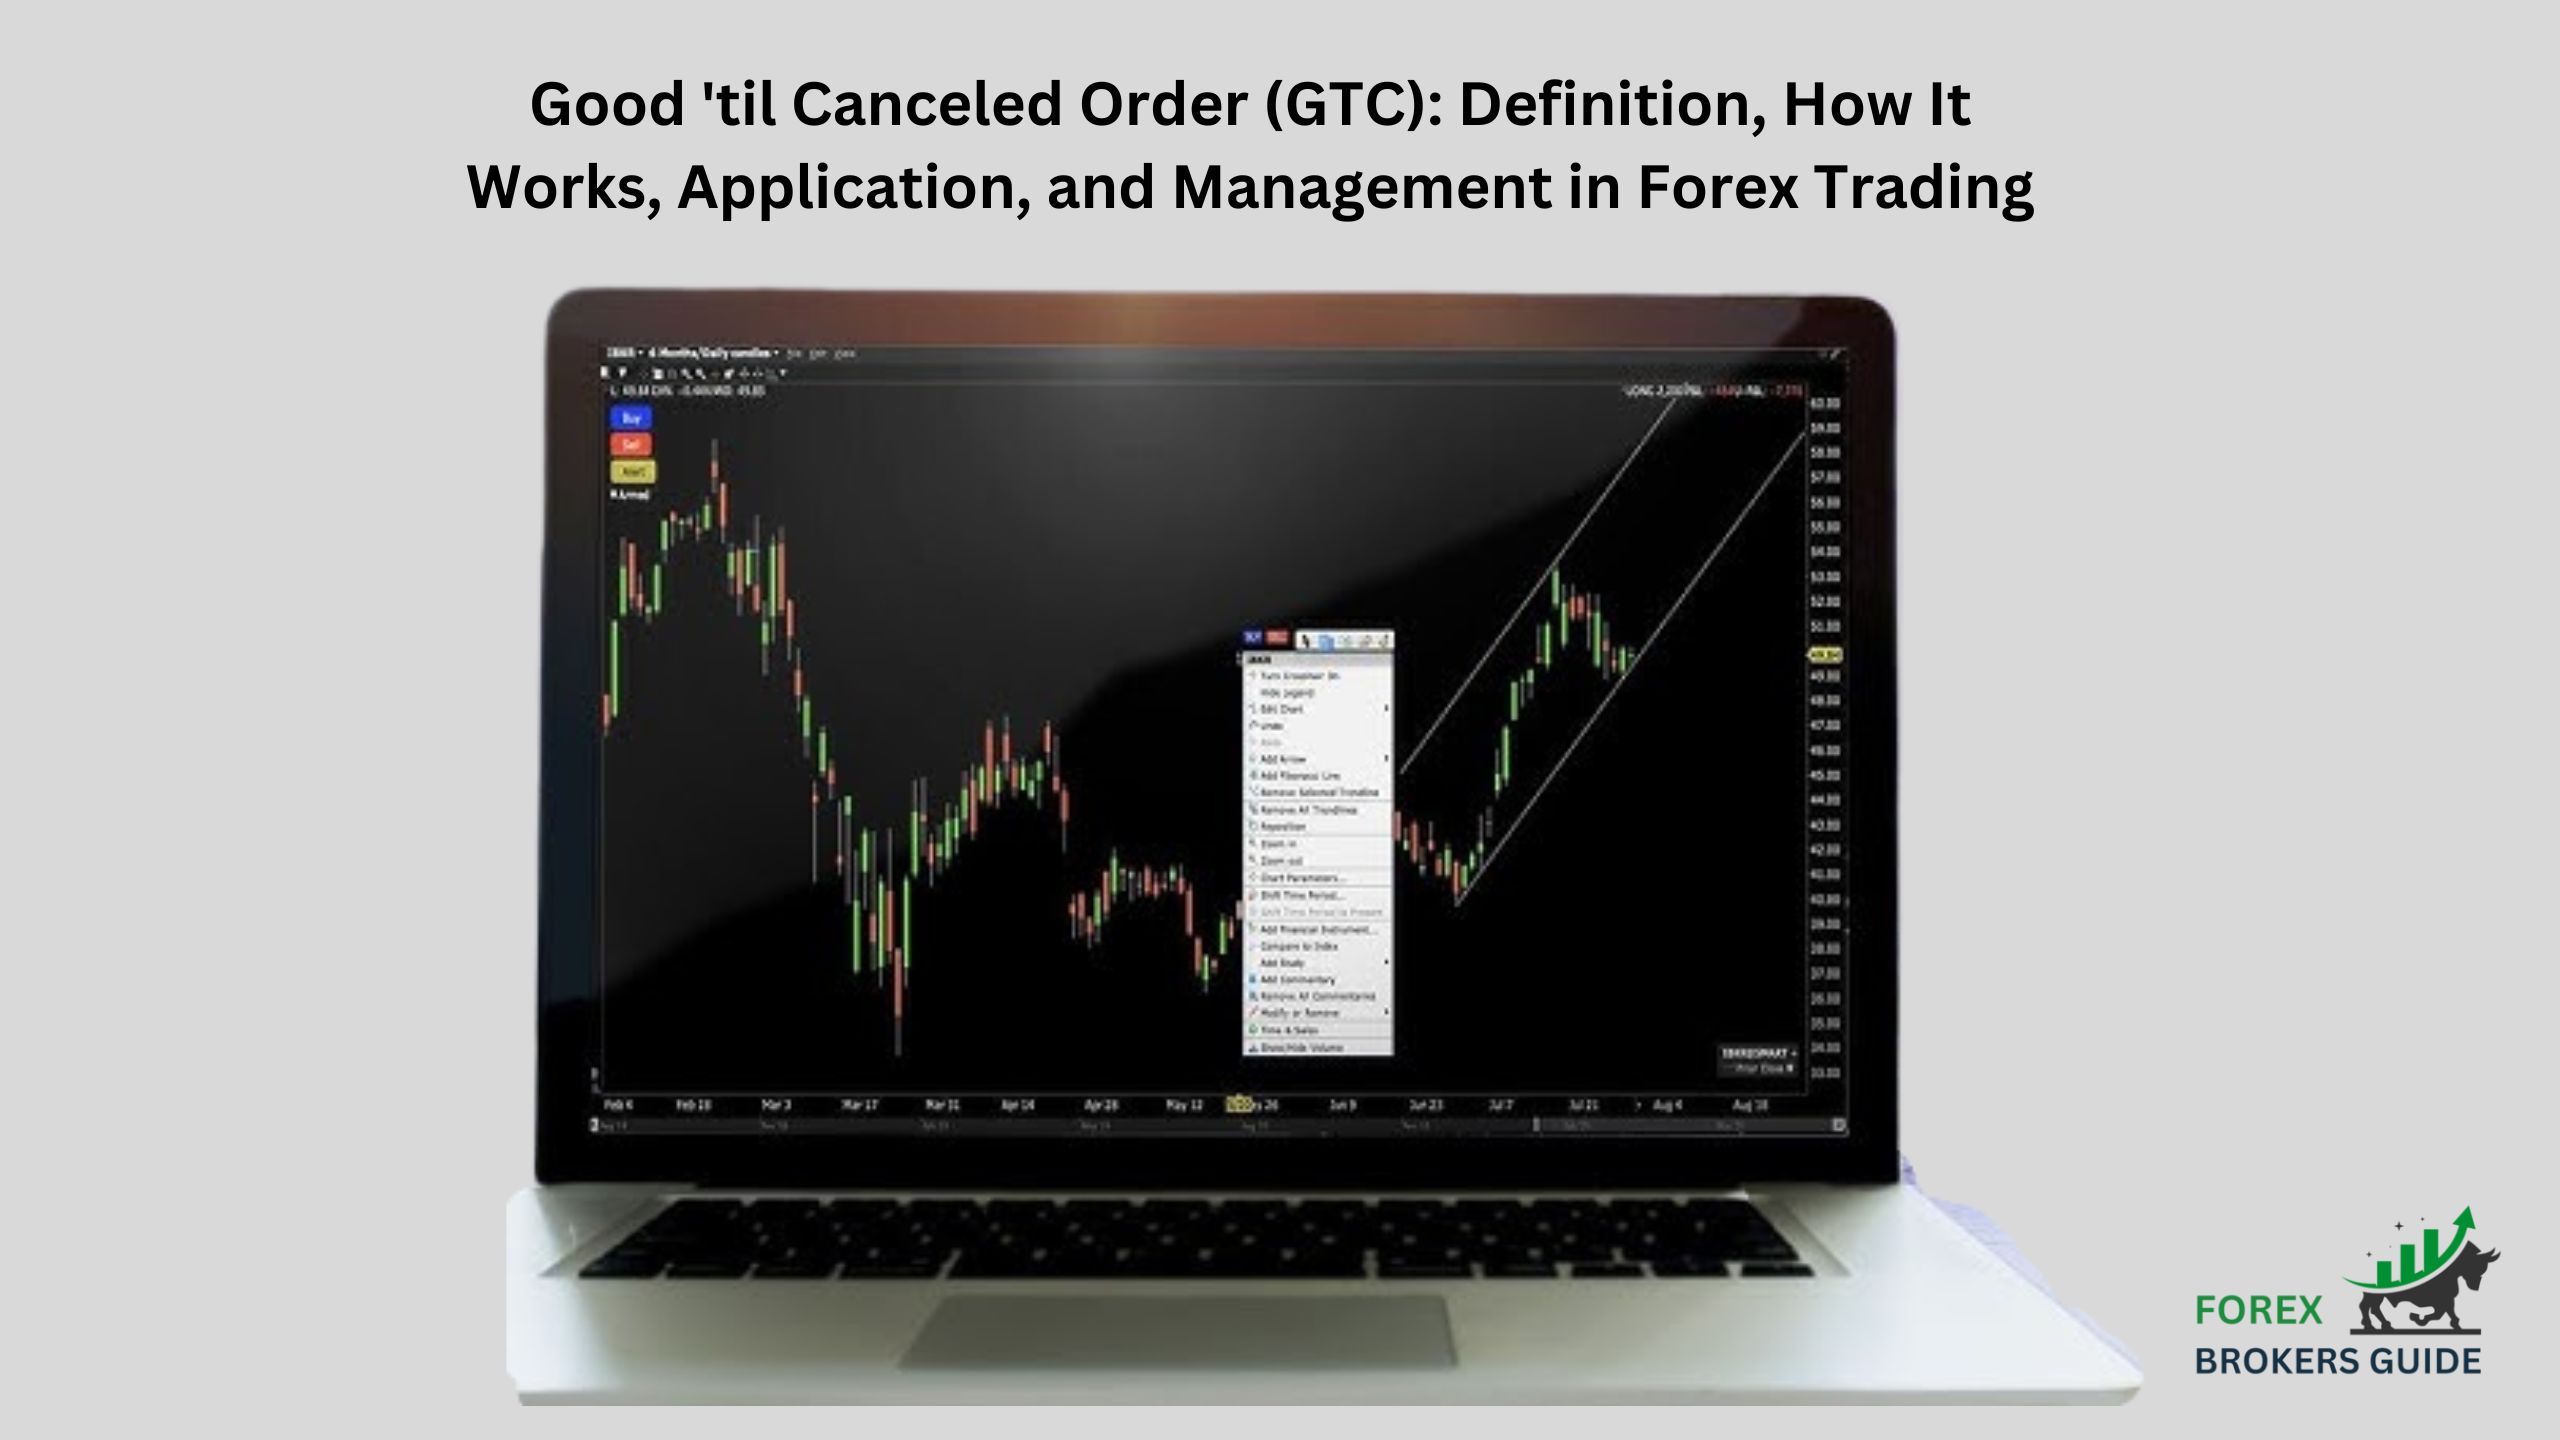 Good 'til Canceled Order (GTC) Definition, How It Works, Application, and Management in Forex Trading